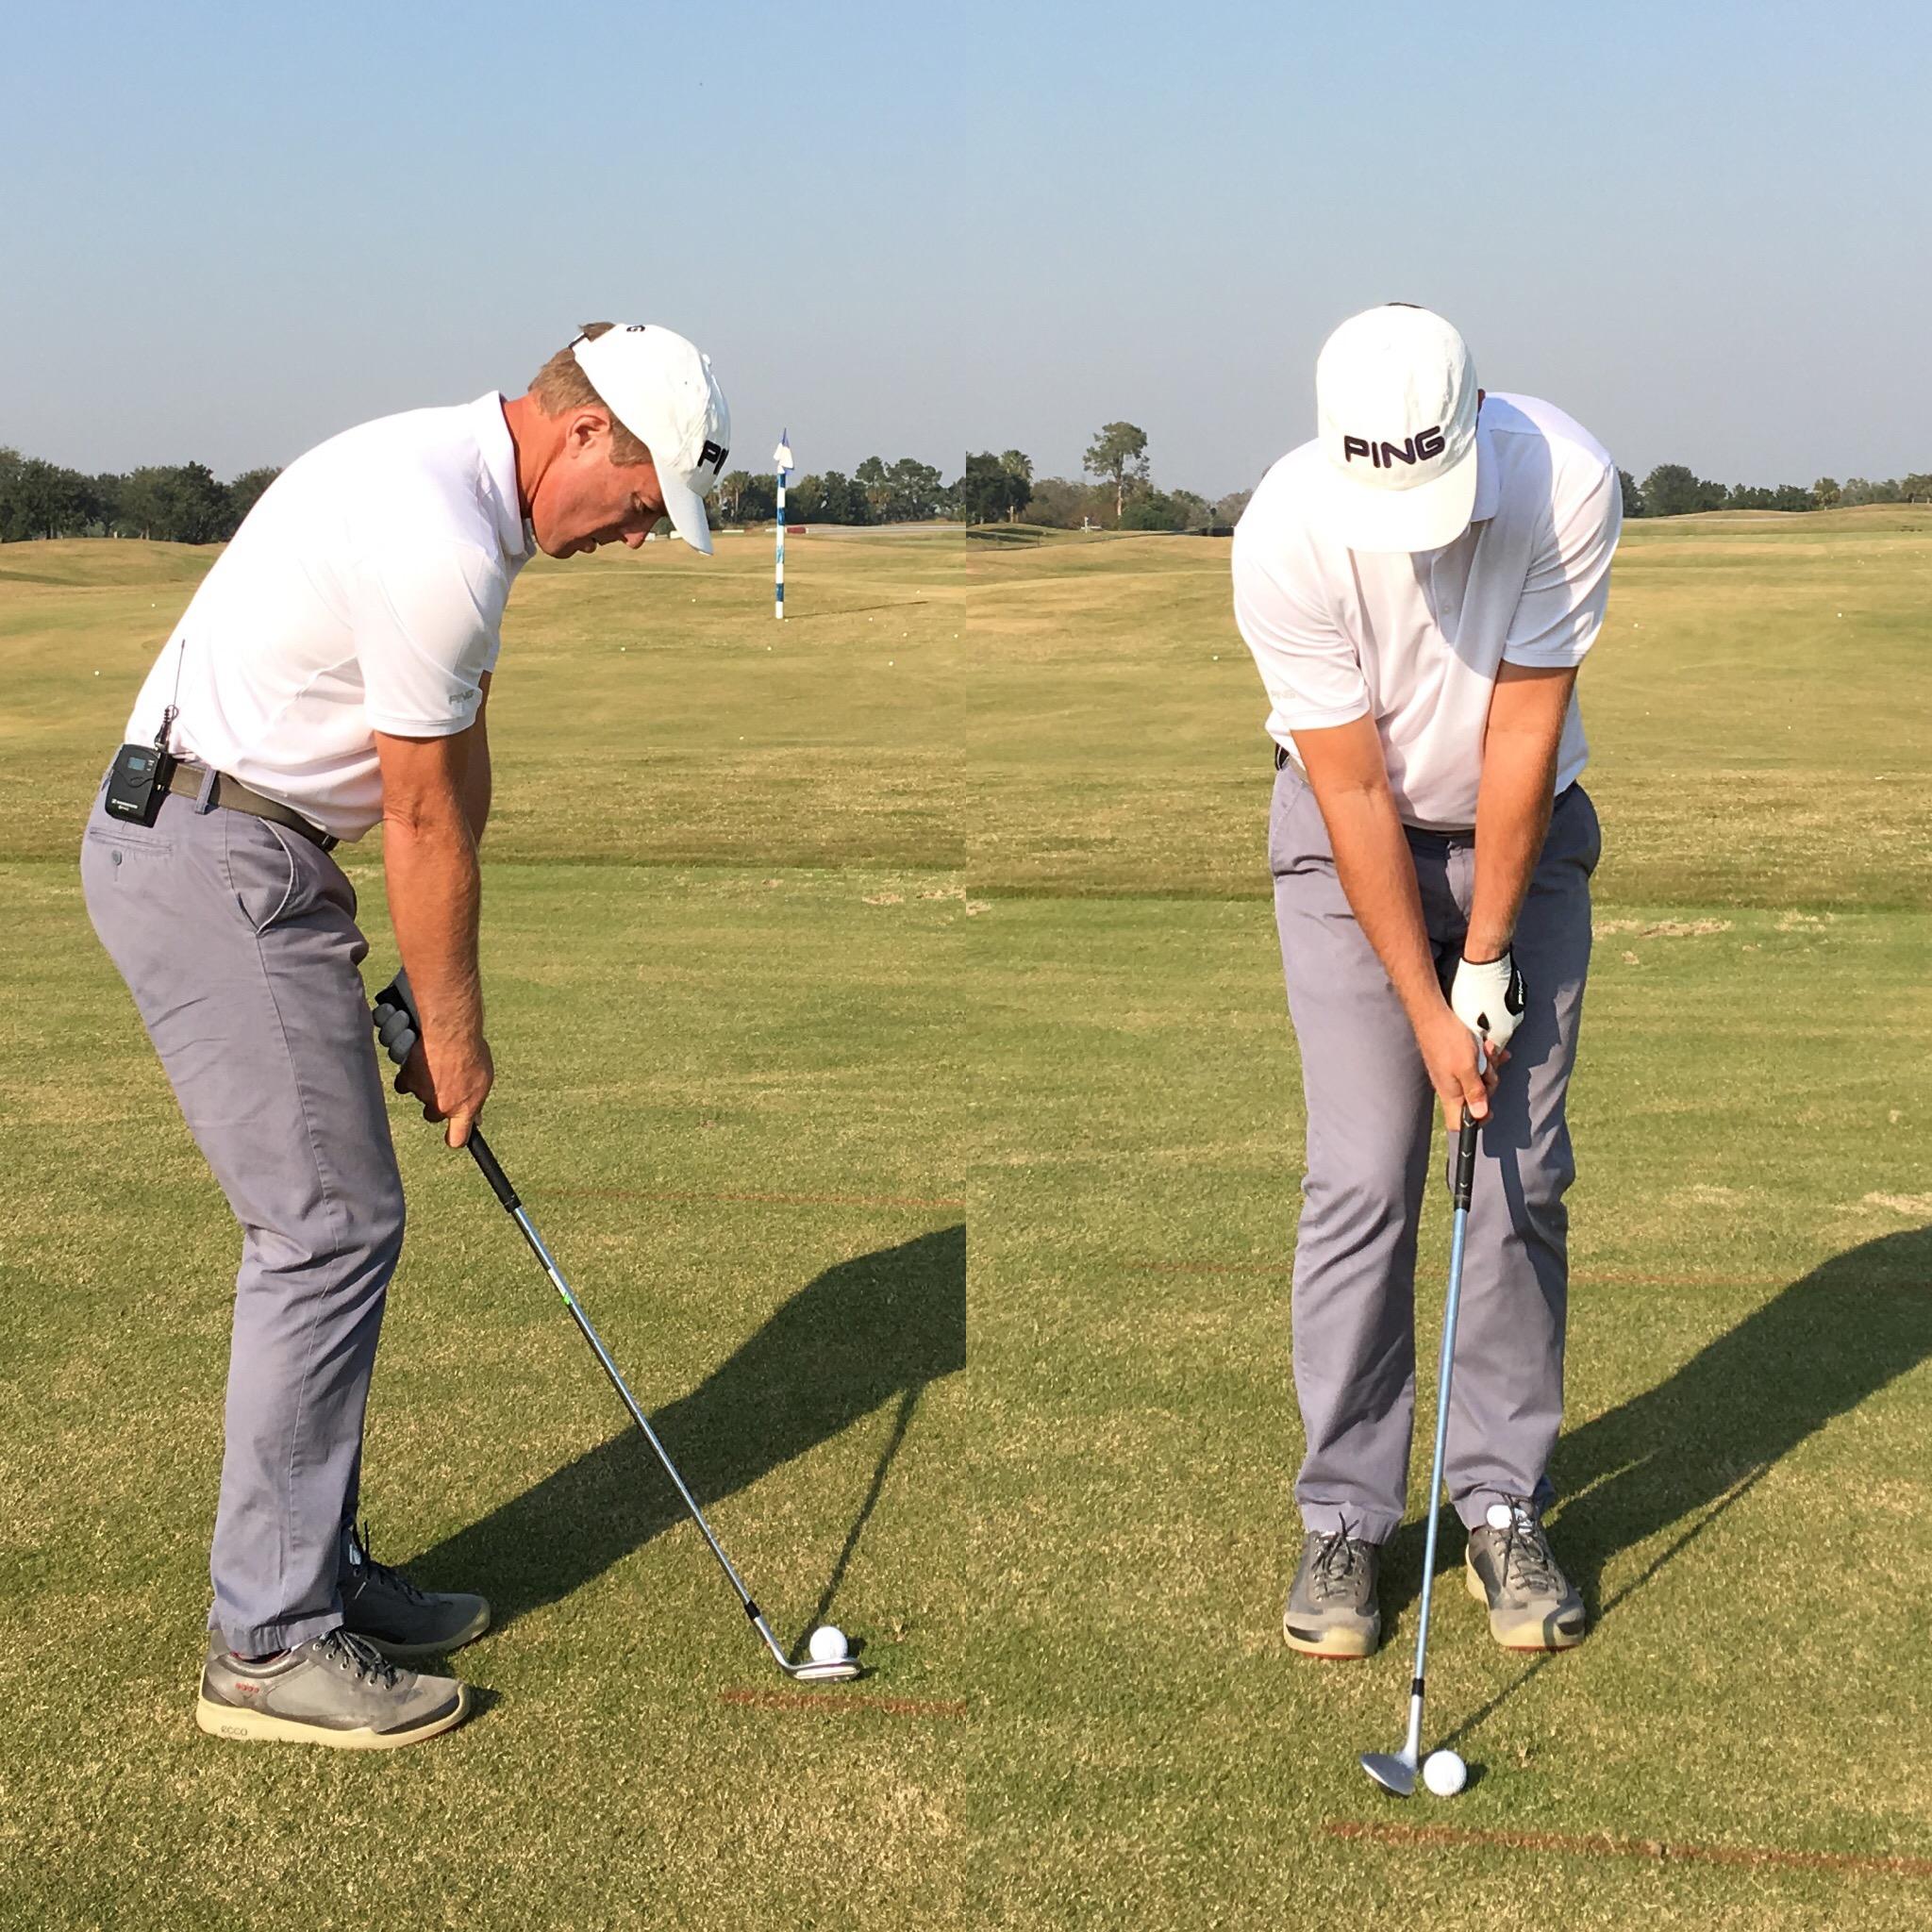 3 Keys to Great Wedge Play